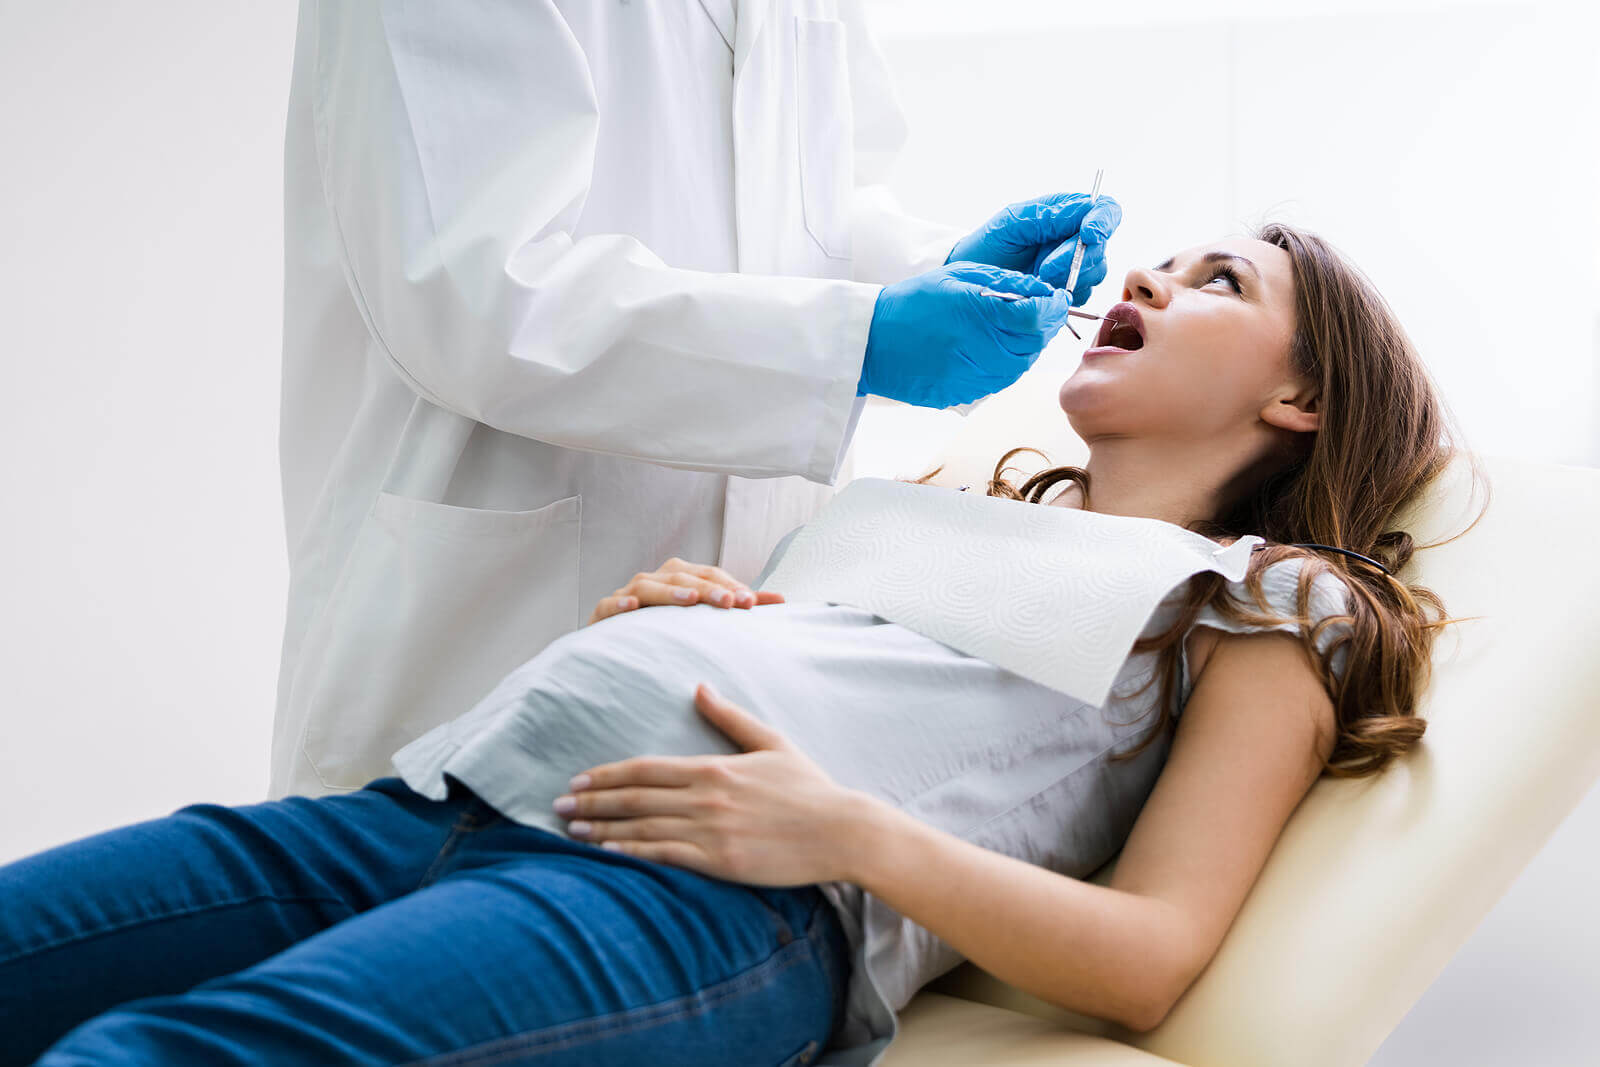 A pregnant woman at the dentist.